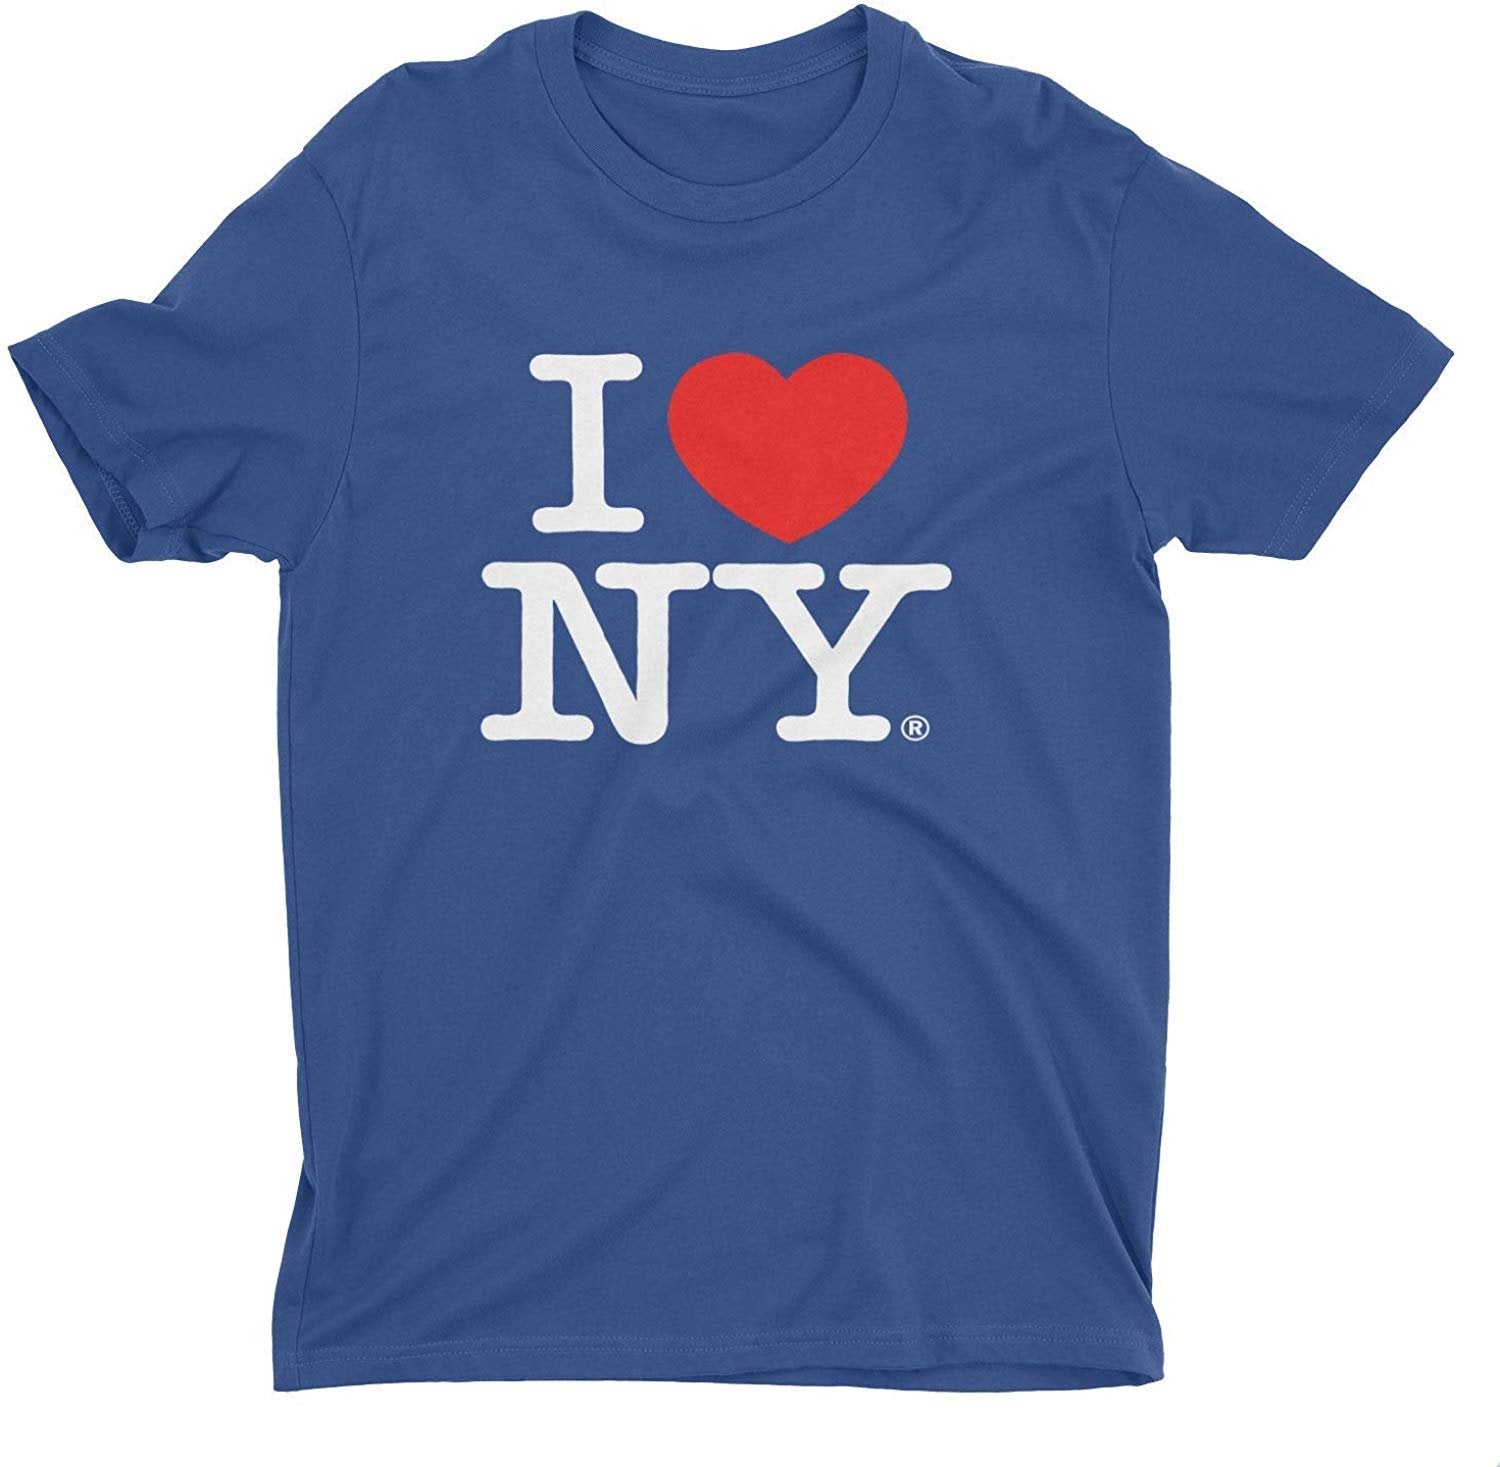 I Love NY Kids T-Shirt Officially Licensed Unisex Tees (Youth, Navy Blue)